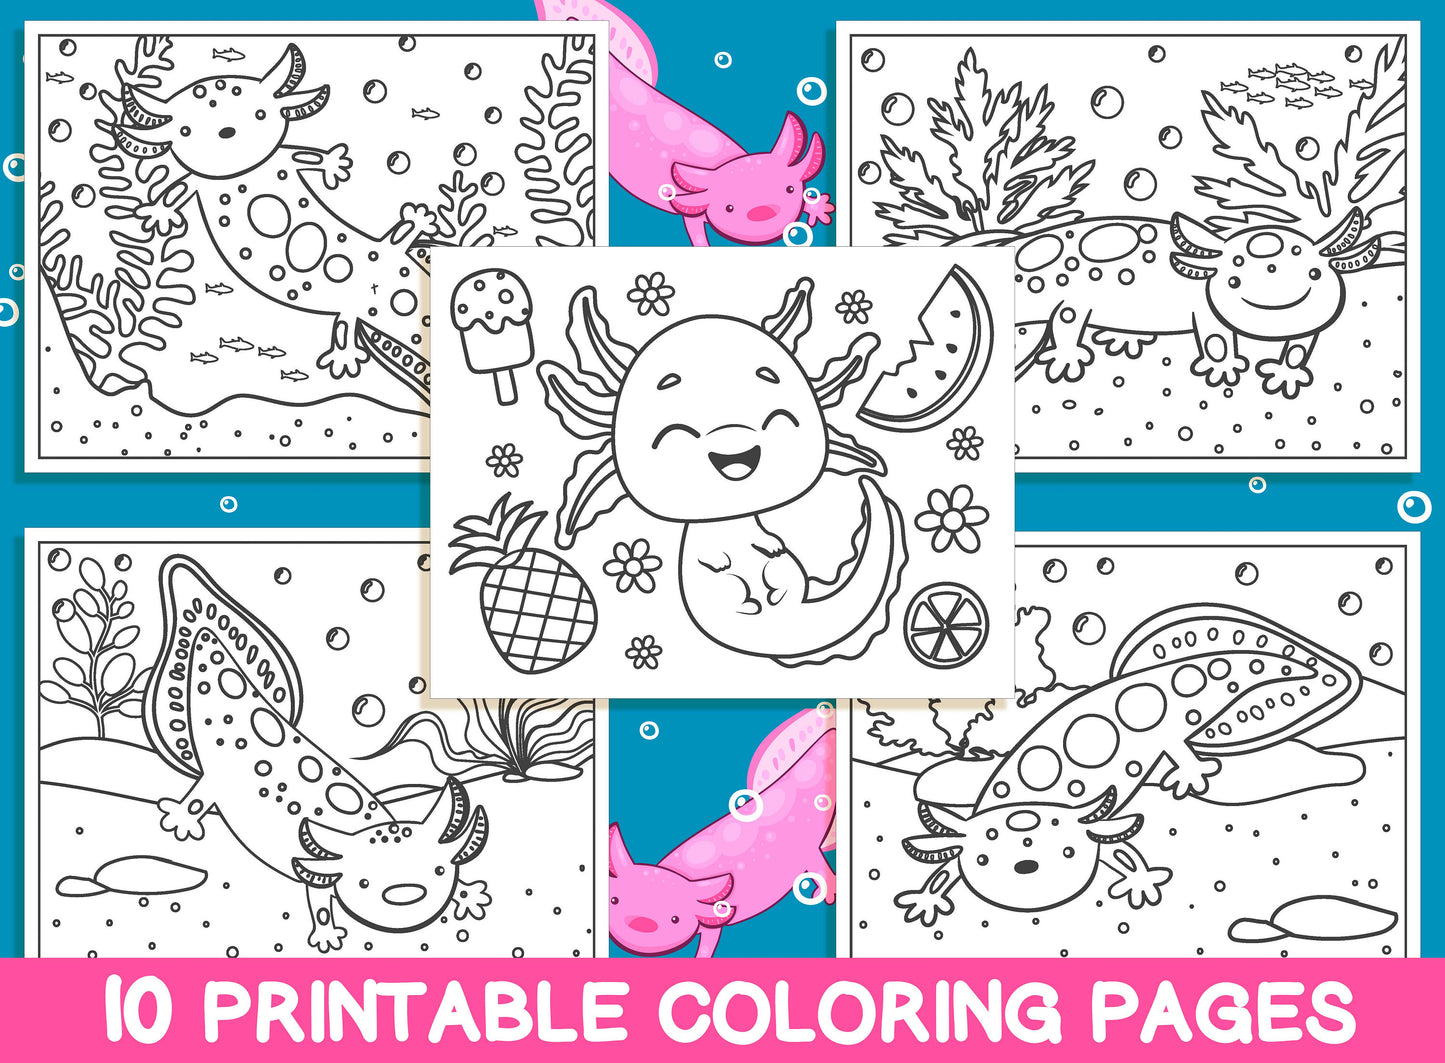 Axolotl Coloring Pages, 10 Printable Axolotl Coloring Pages for Kids, Boys, Girls, Teens, Axolotl Birthday Party Activity, Instant Download